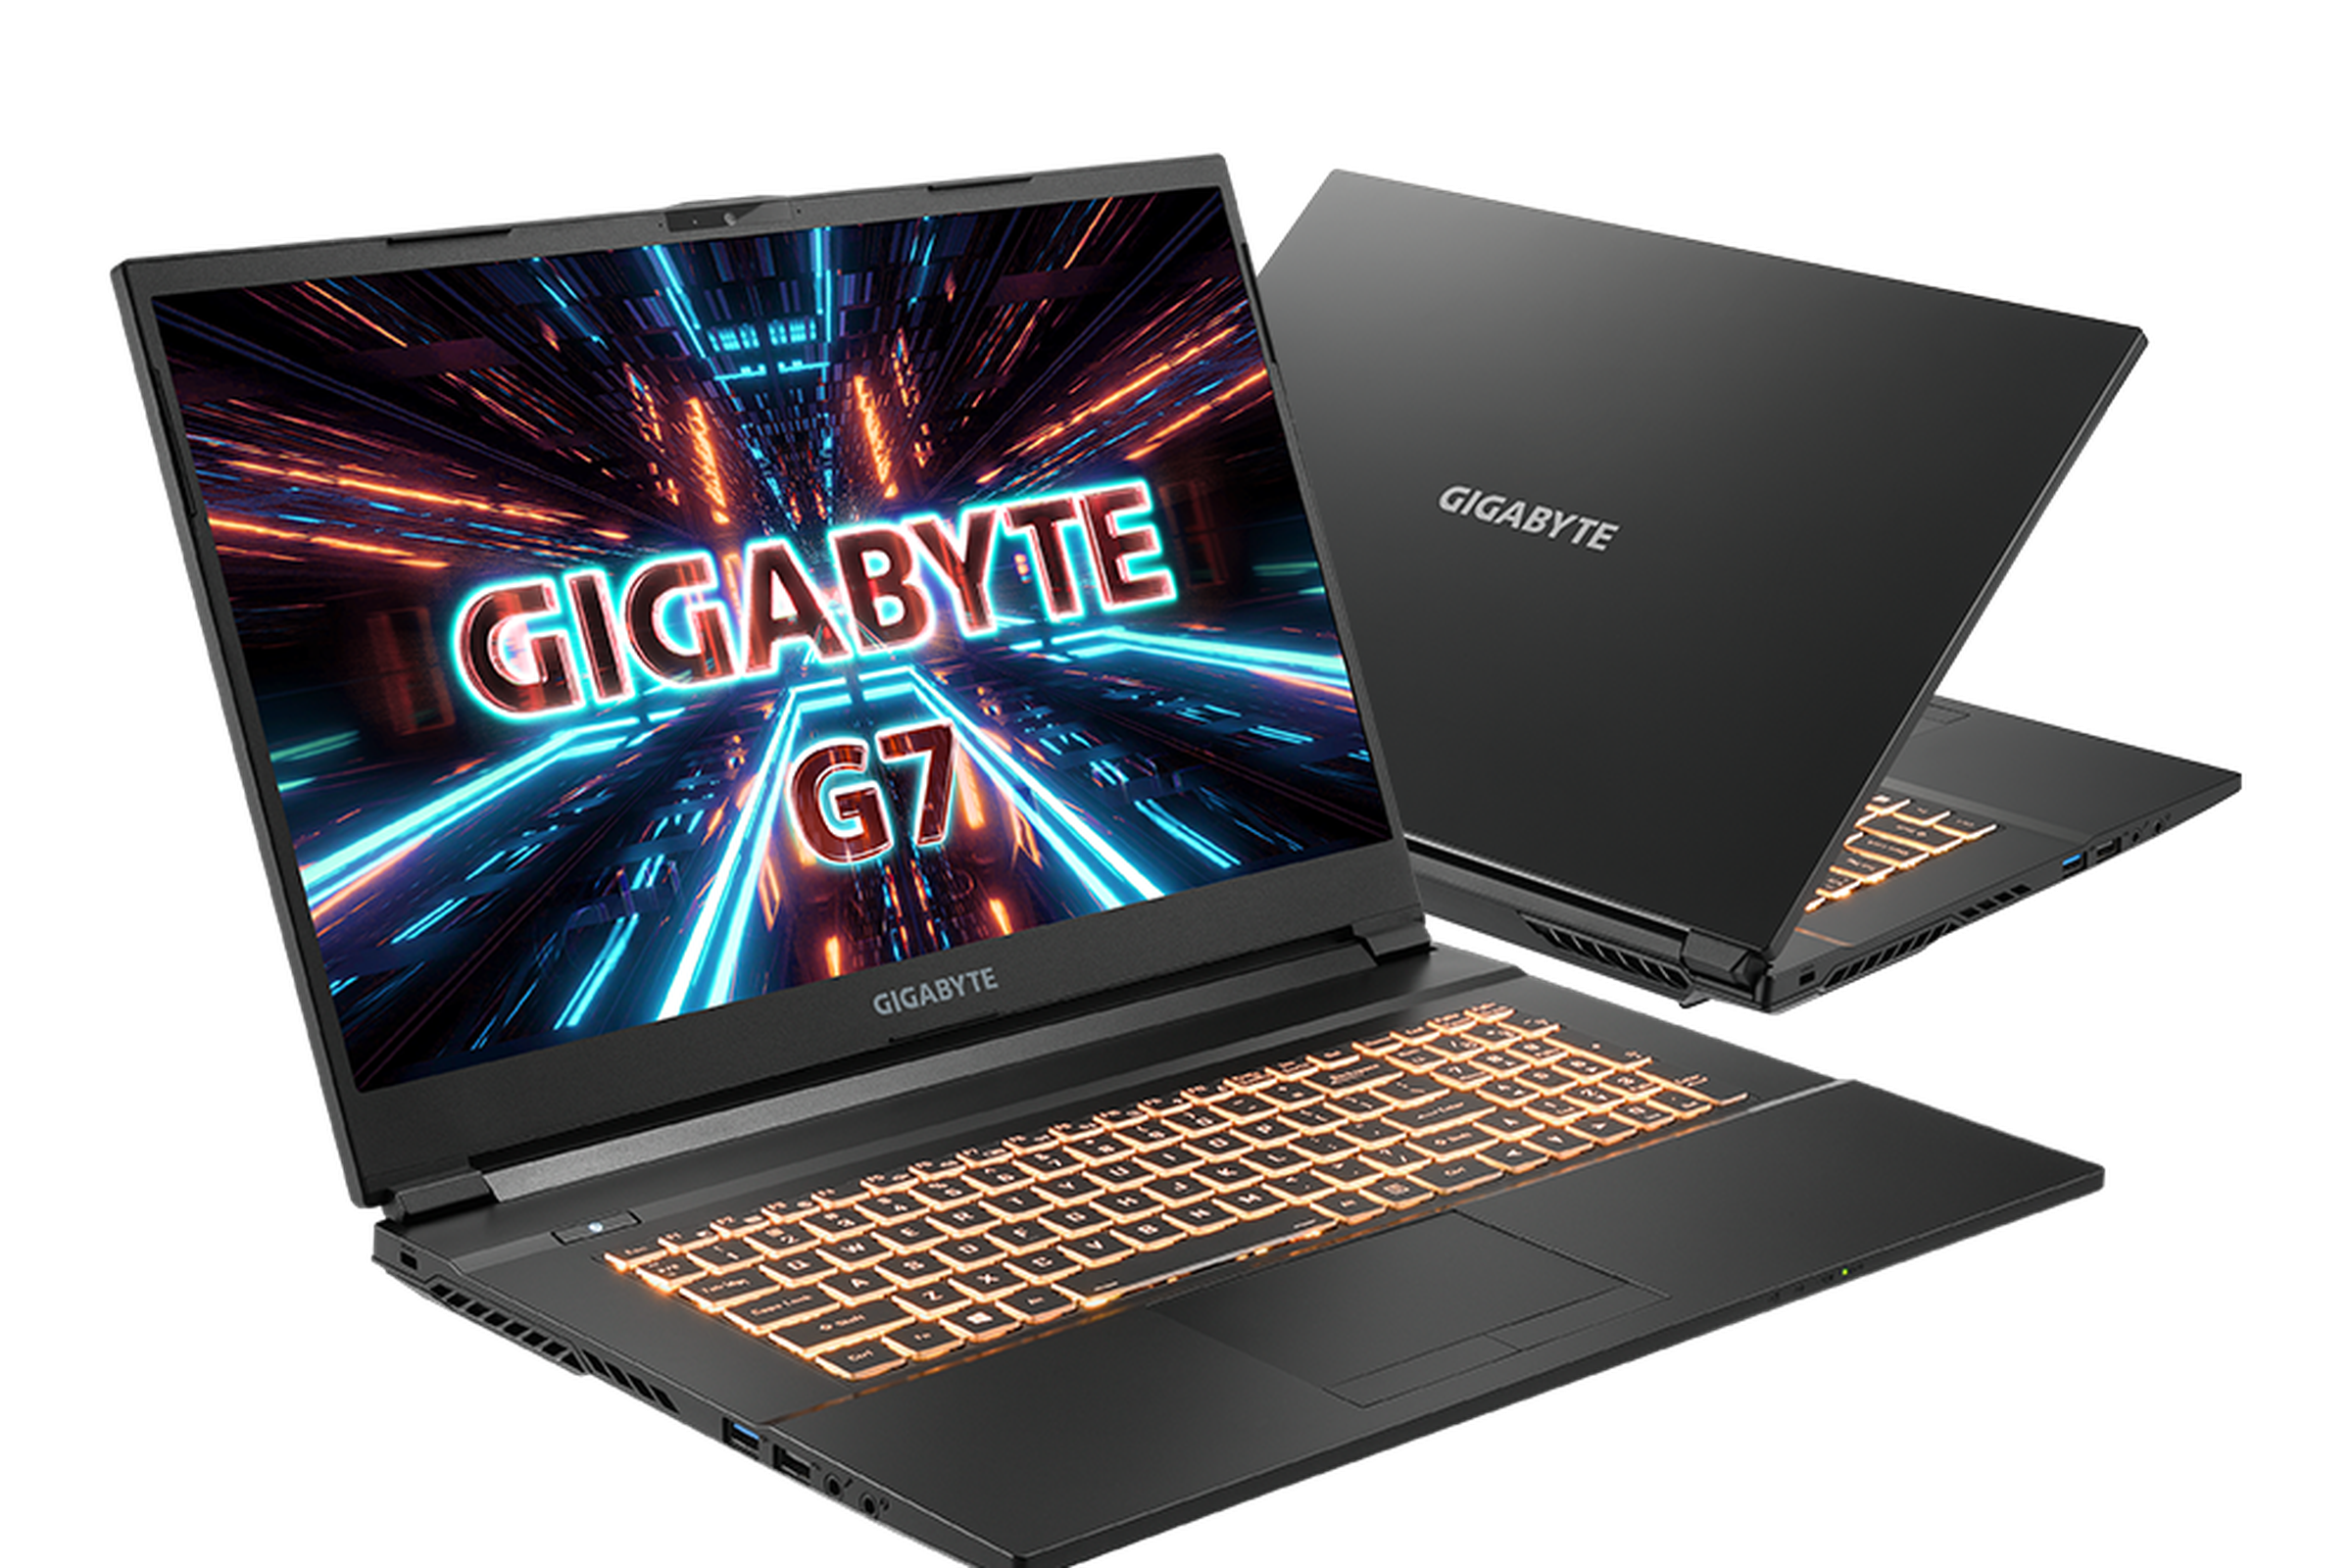 Two Gigabyte G7 models perpendicular to each other. The front model is angled slightly backwards with the Gigabyte G7 logo displayed on the screen. The back is slightly closed.